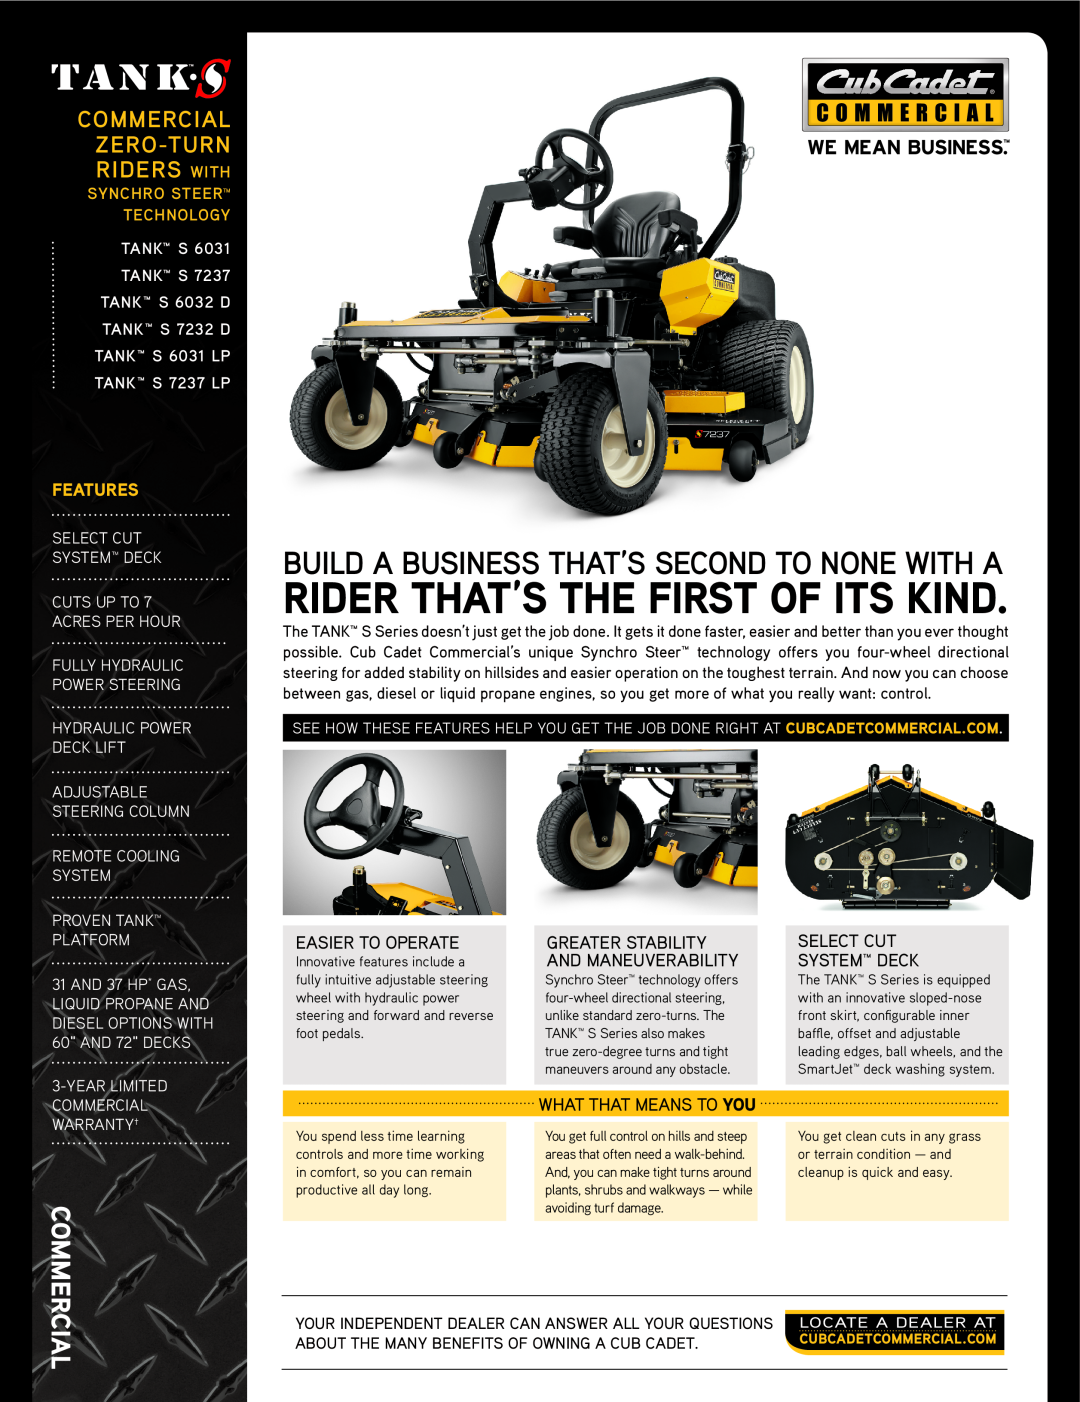 Cub Cadet 6031 manual your independent dealer can answer all your questions, about the many benefits of owning a Cub Cadet 